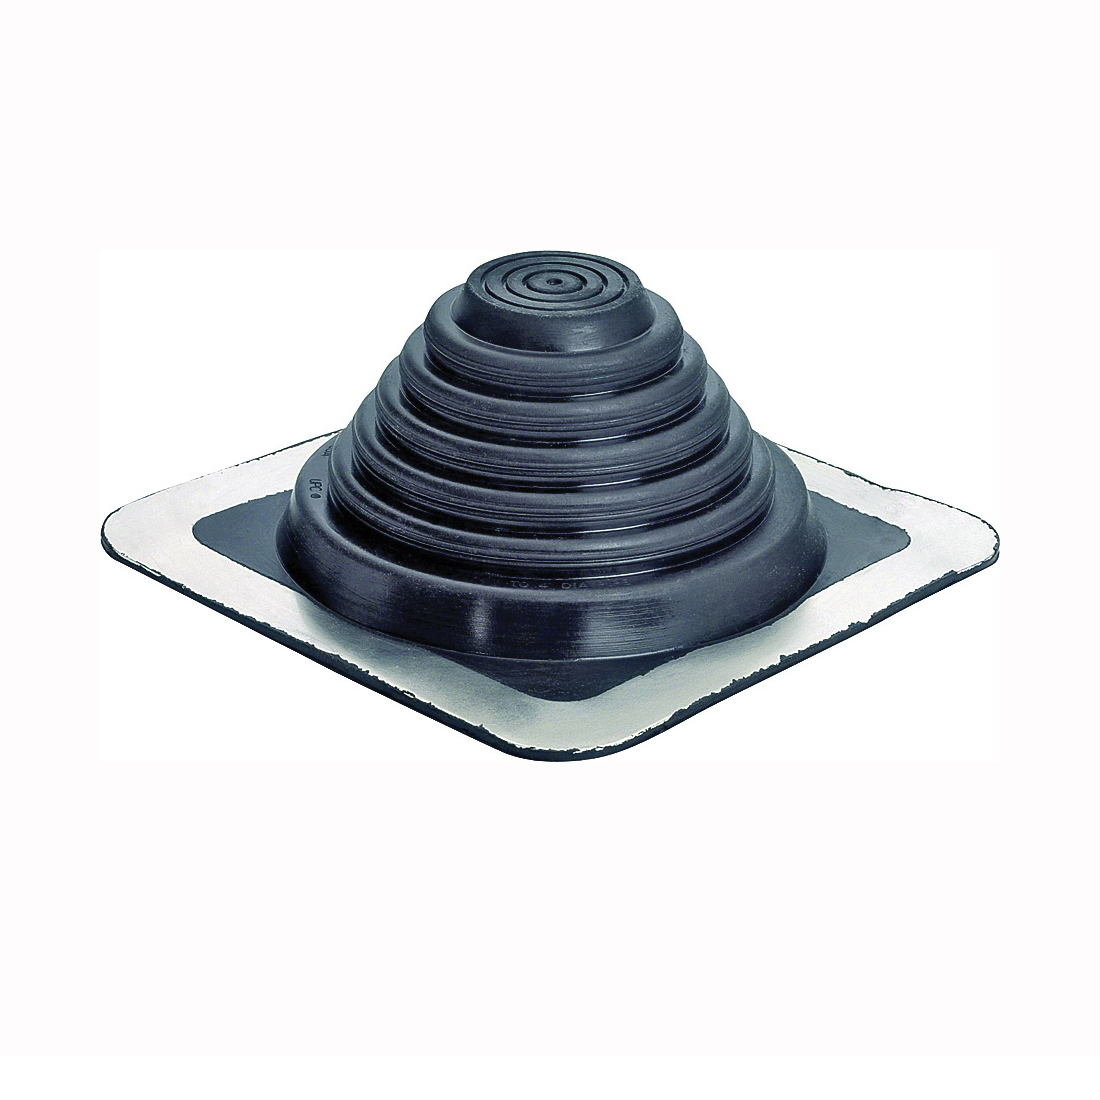 Hercules Master Flash Series 14052 Roof Flashing, 8 in OAL, 8 in OAW, EPDM Rubber - 1